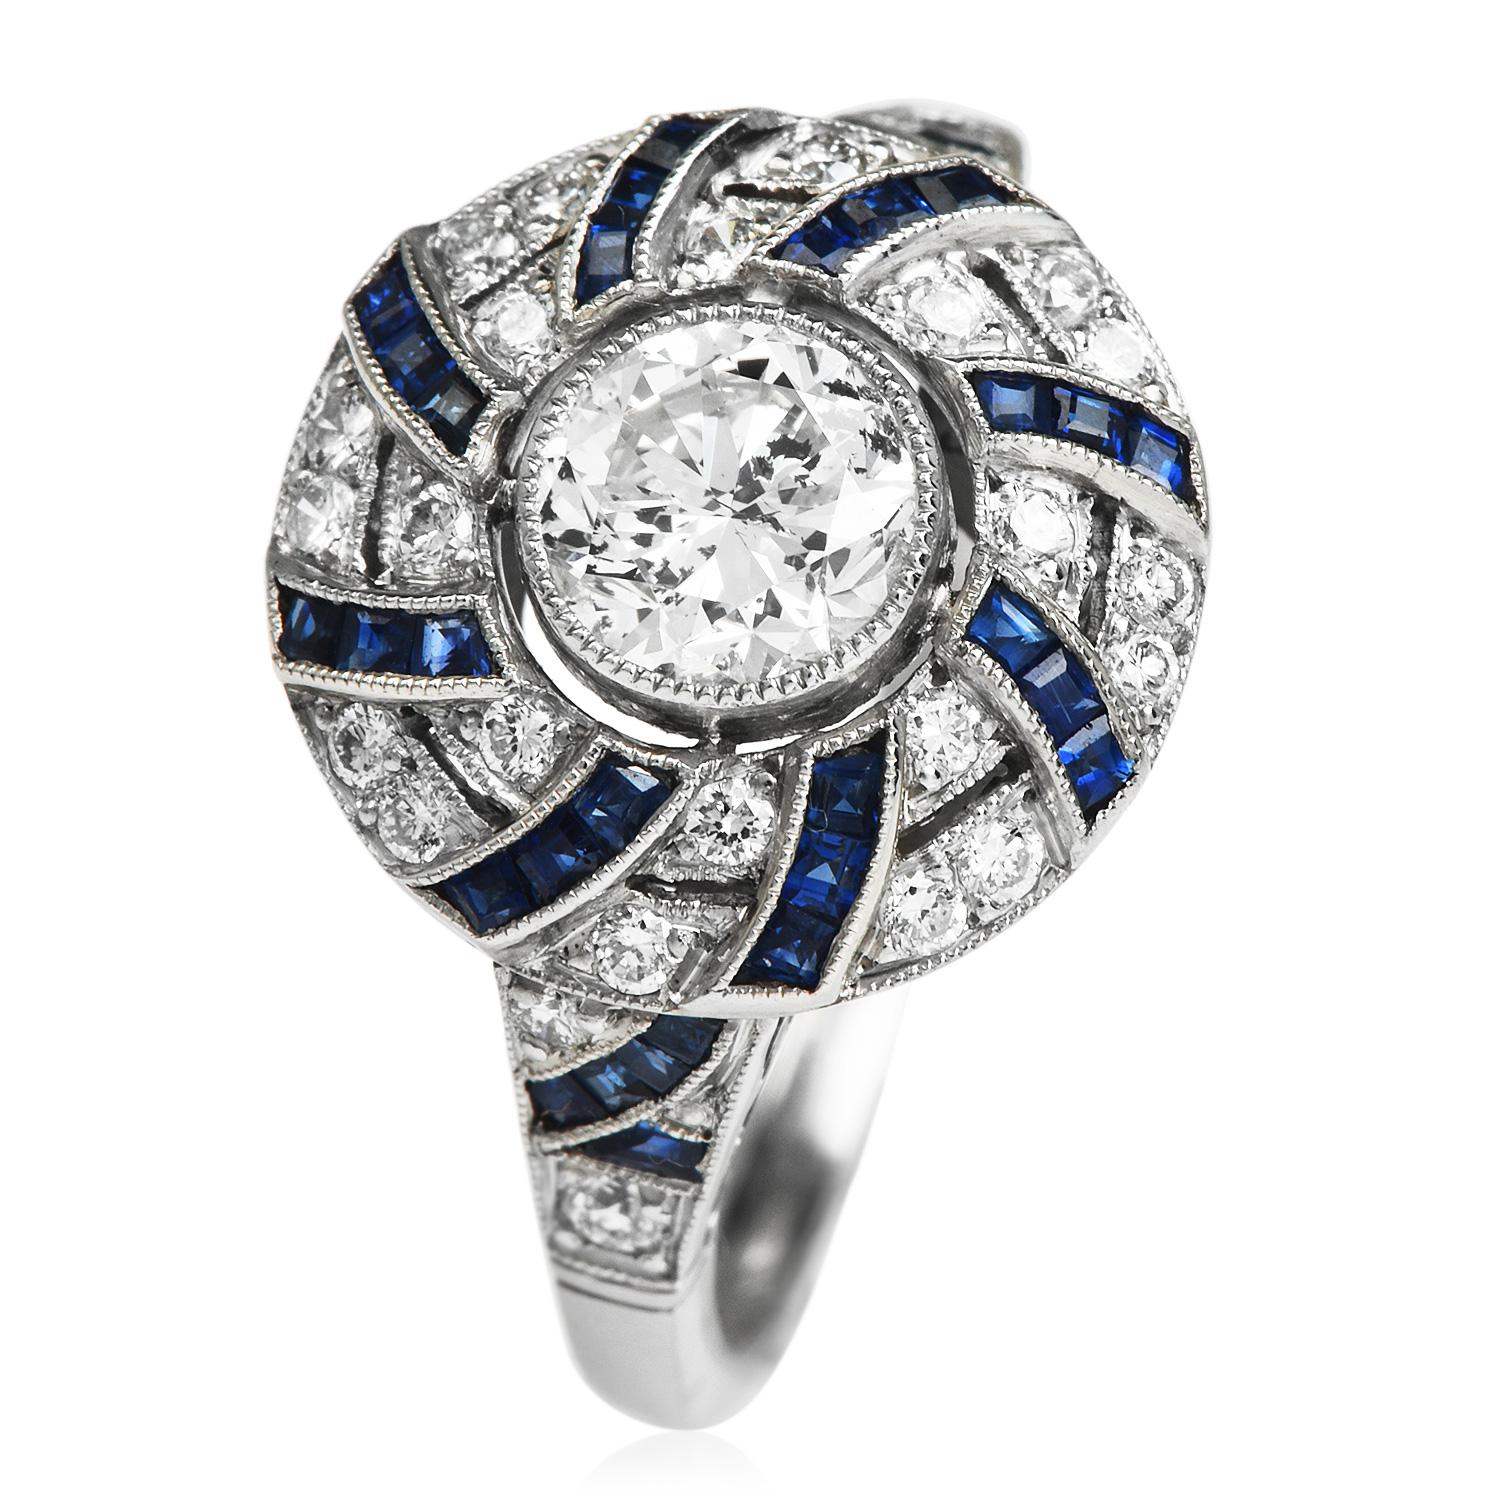 This art deco design, Diamond and Sapphire Ring, is crafted in Platinum.

Featuring a round-cut Round diamond in the center, this ring alternates

Round bezel set diamonds and channel set calibrated cut Sapphire to form an outer ring.

Center